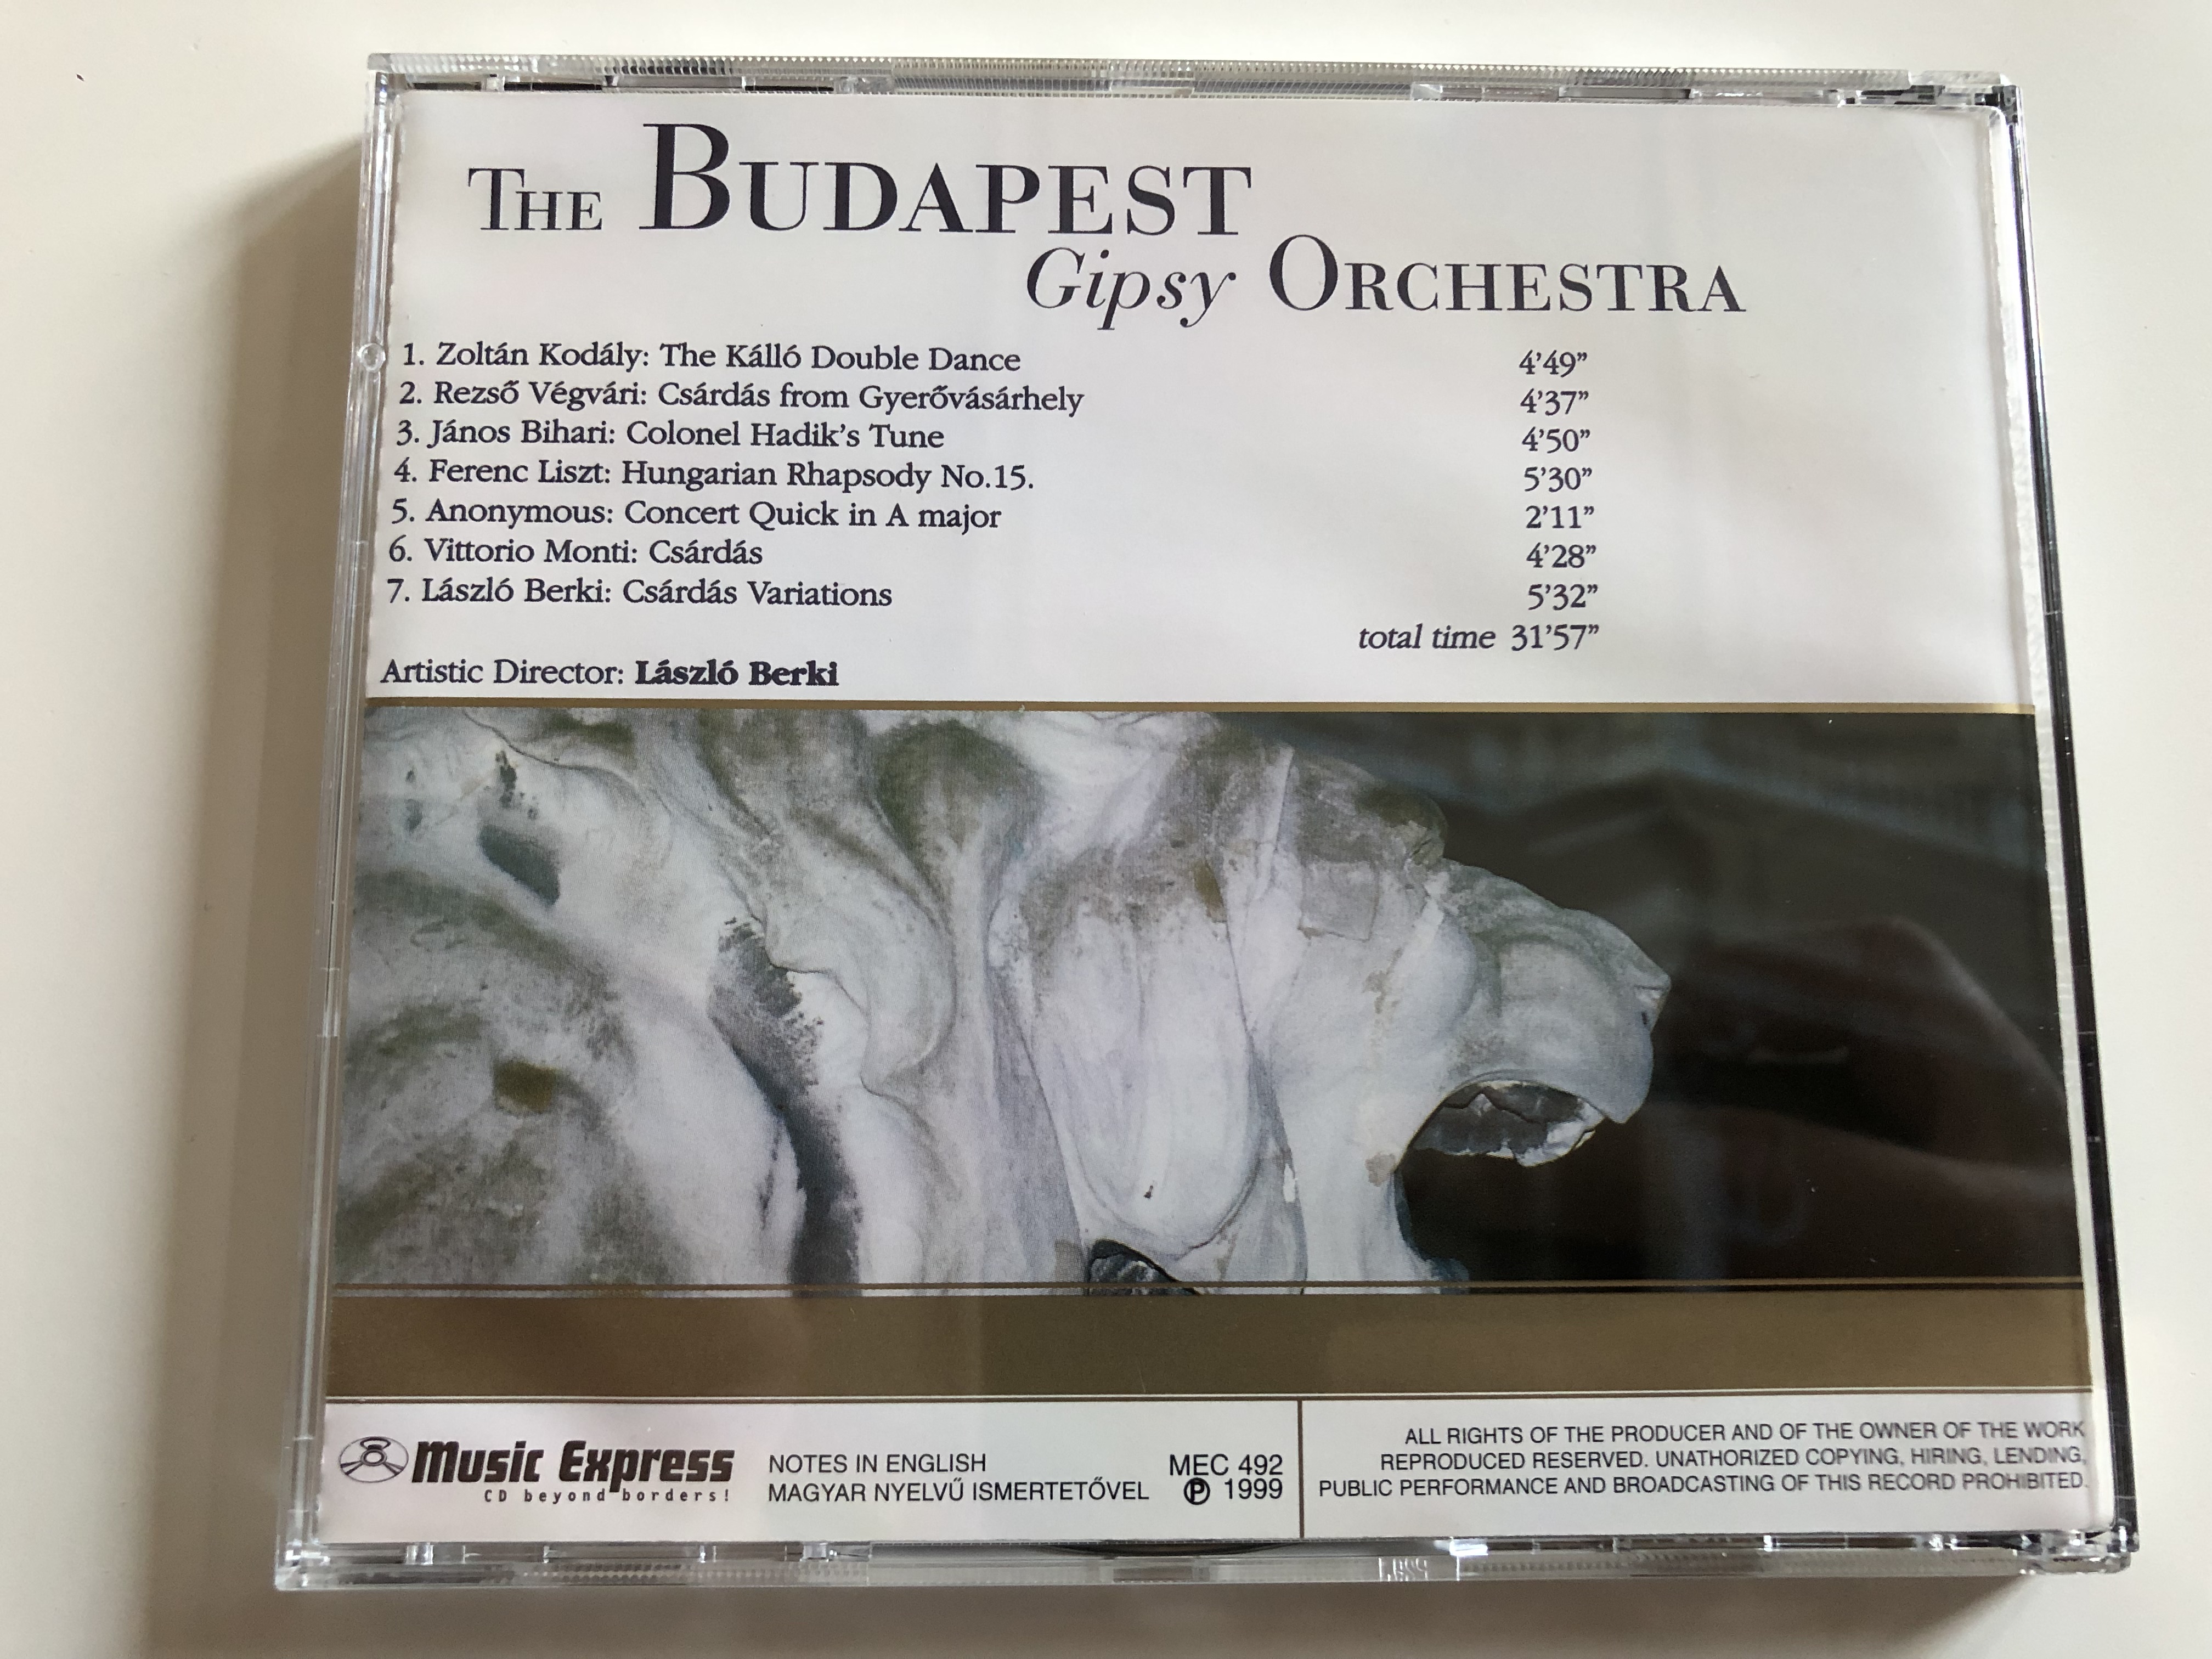 hungarian-specialities-the-budapest-gipsy-orchestra-volume-two-music-express-classics-audio-cd-1999-mec-492-6-.jpg